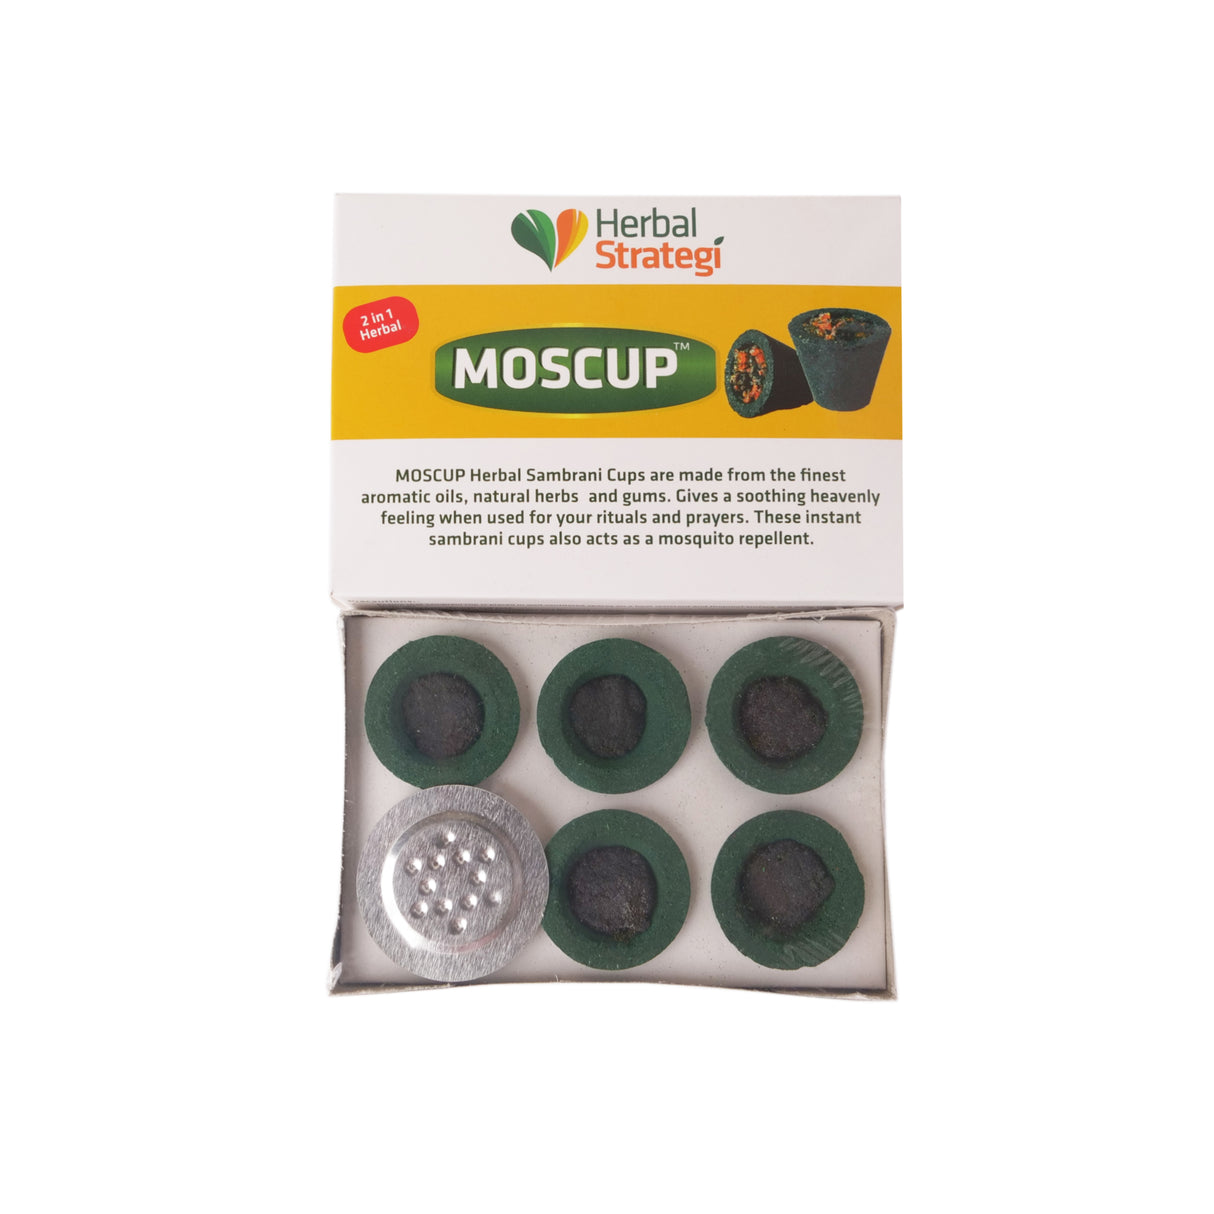 MOSCUP - Herbal Sambrani Cups | Pack of 6 Cups